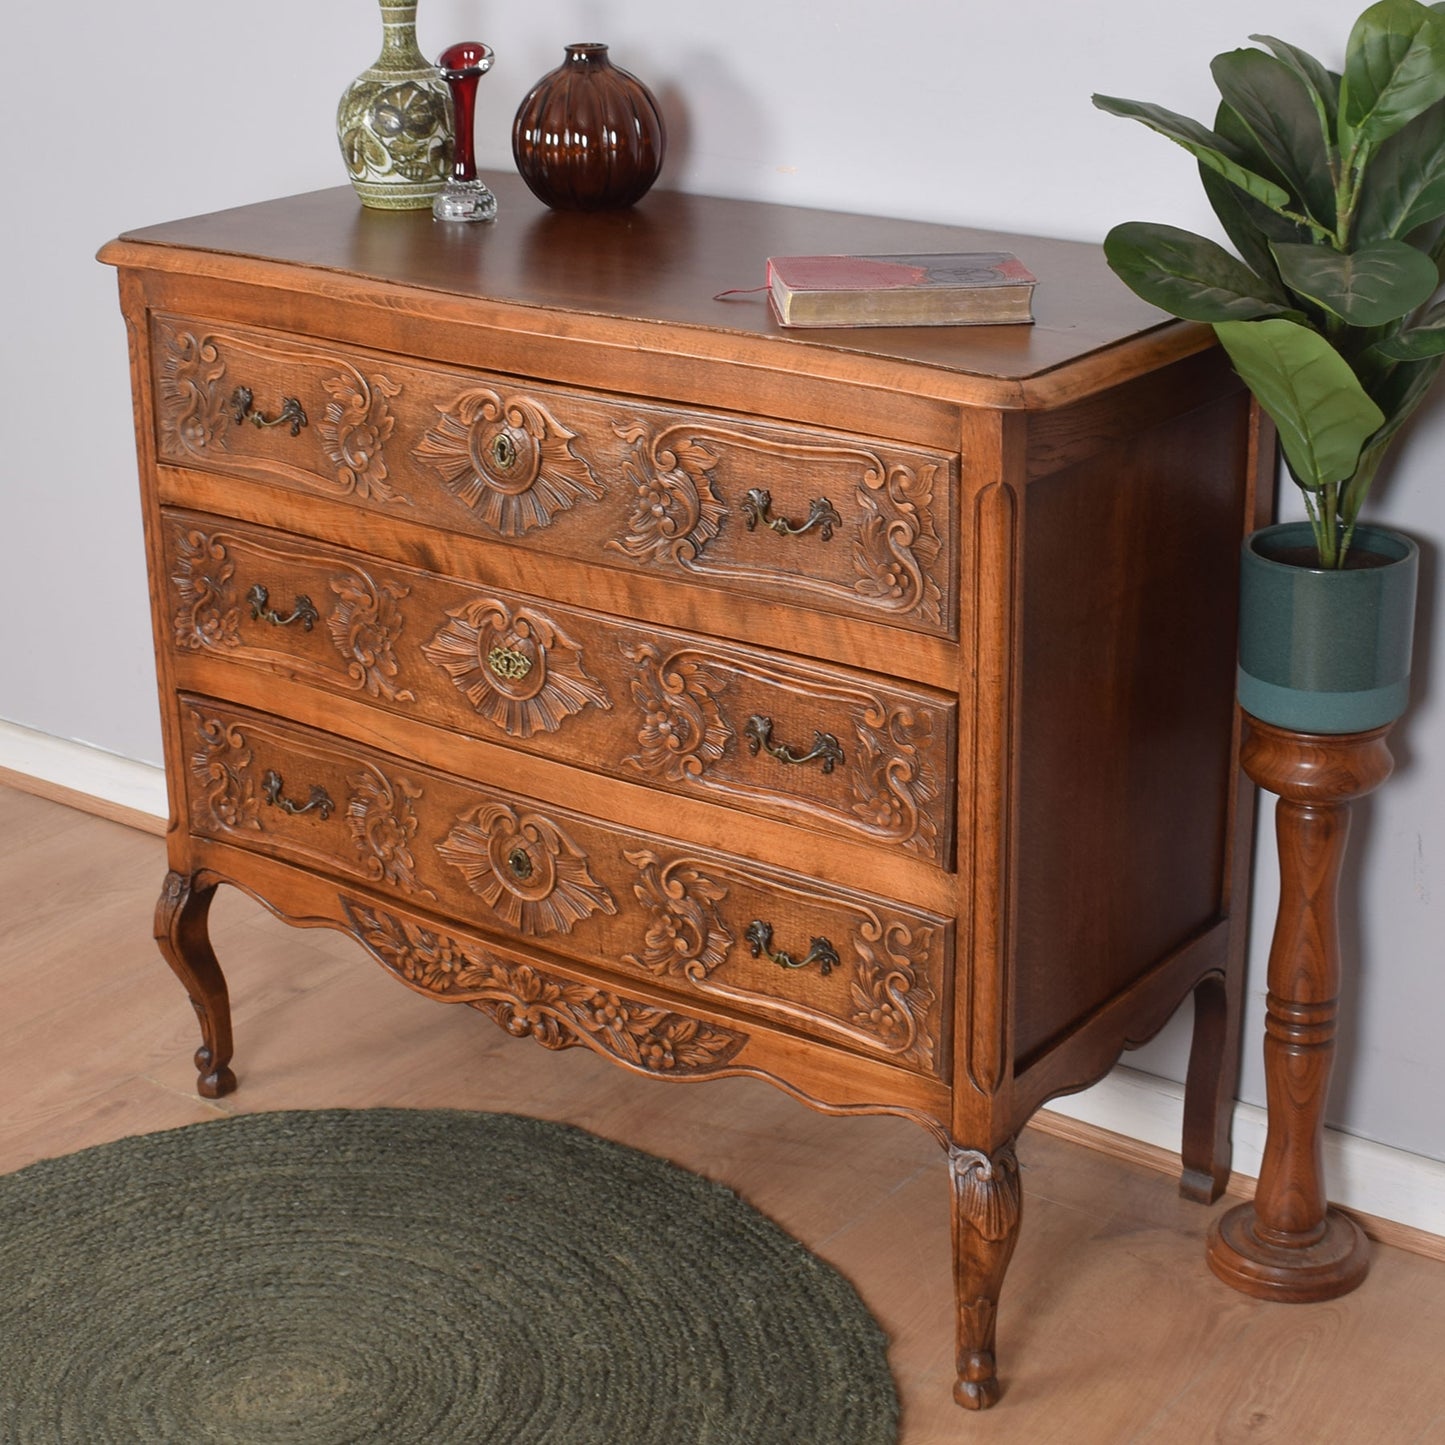 French Chest of Drawers